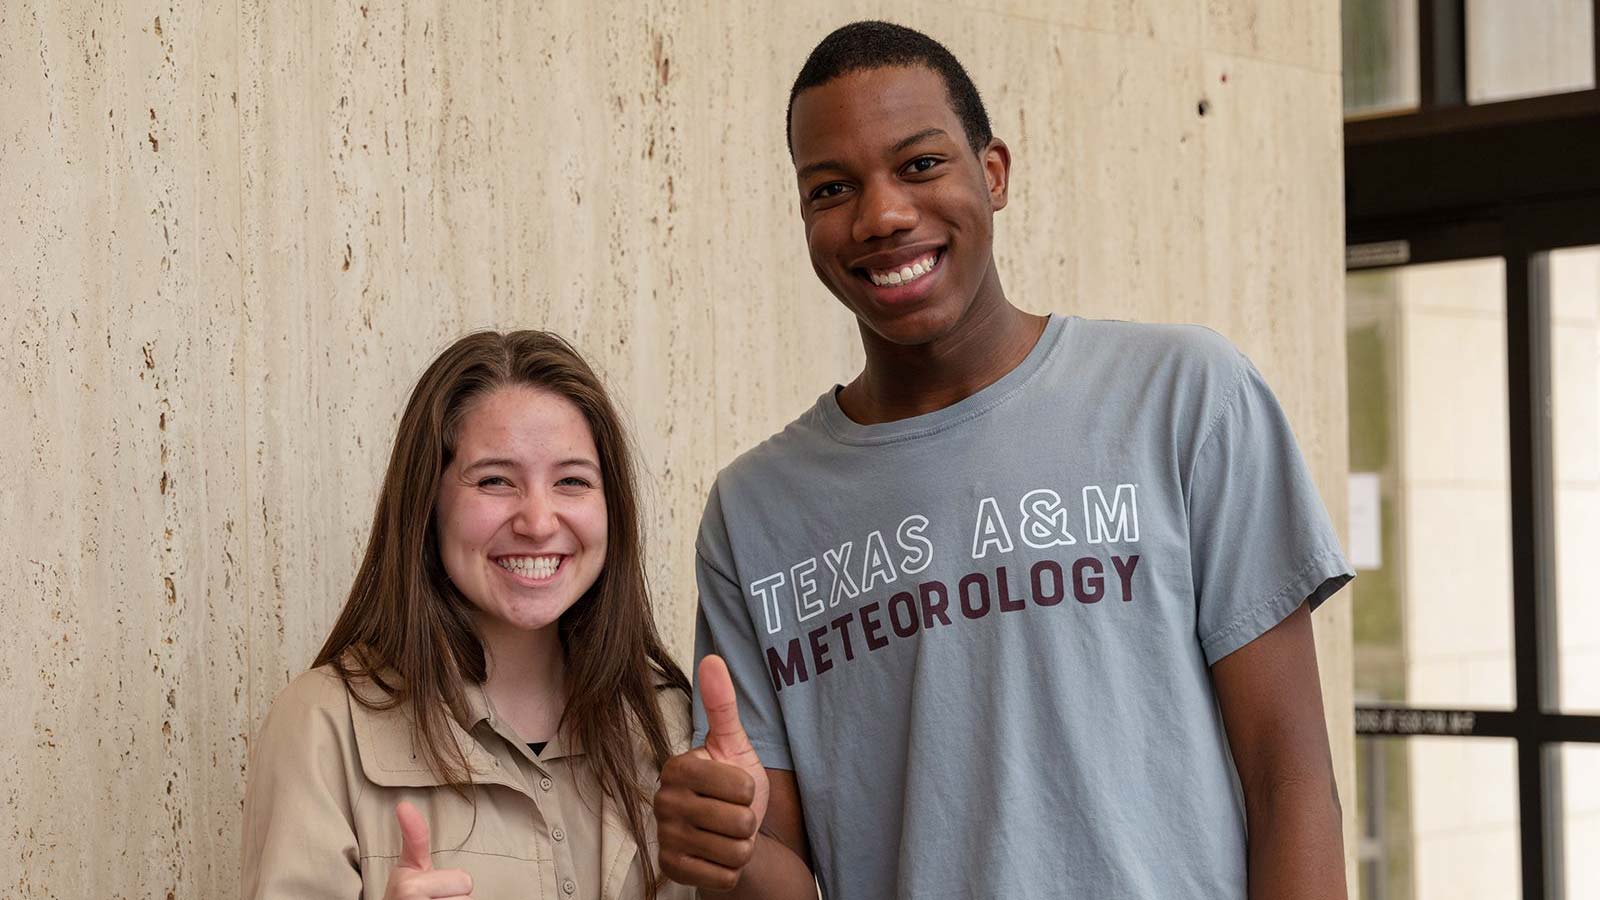 Two meteorology students smiling.